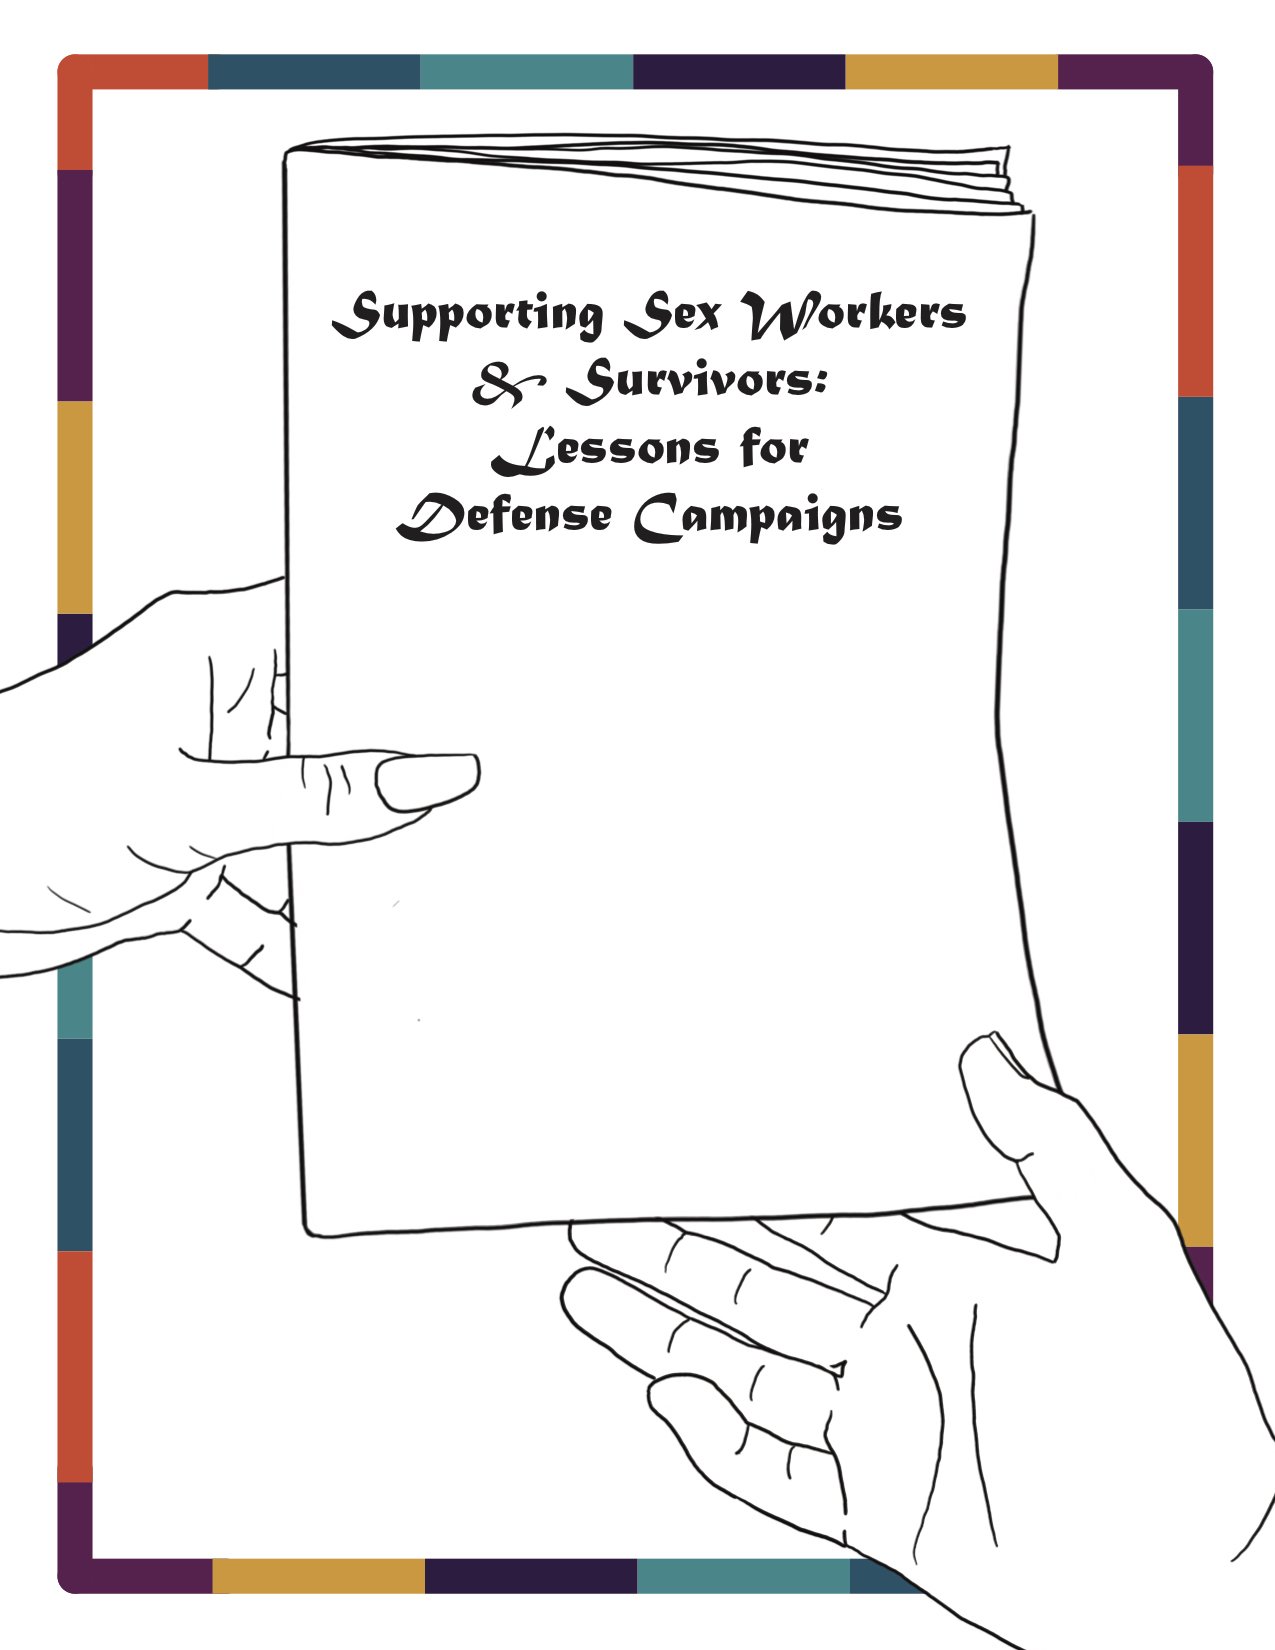  cover illustration for  Supporting Sex Workers &amp; Survivors toolkit  for  Survived and Punished  and  Support Ho(s)e Collective  | 2022 